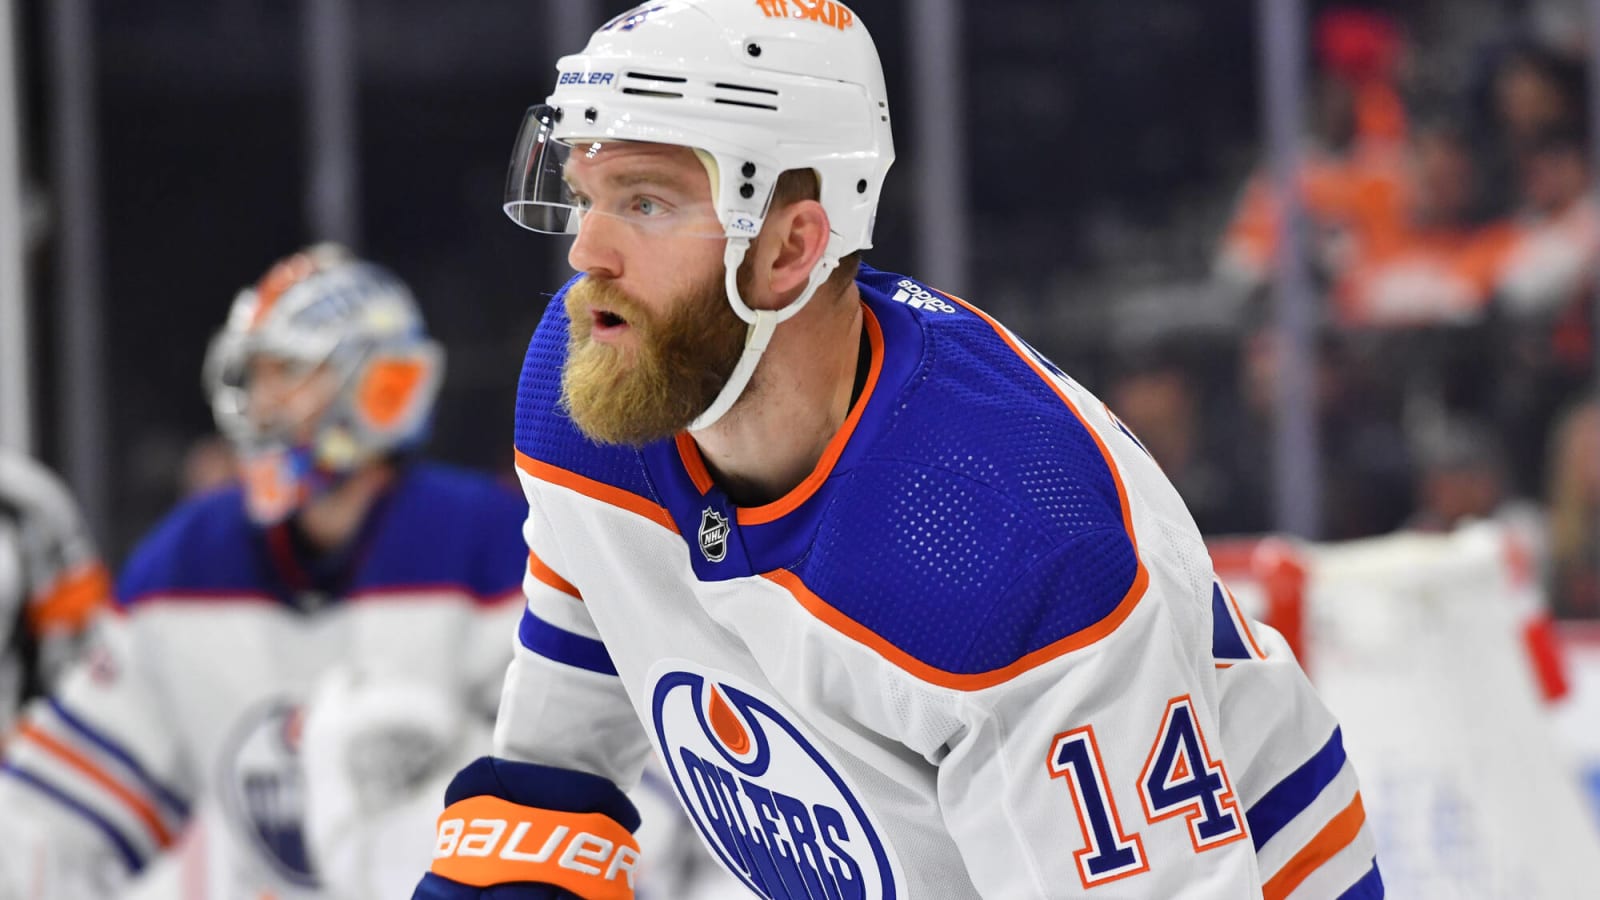 Oilers’ Ekholm Wrongly Cursed Out in Reaction to Player Rankings